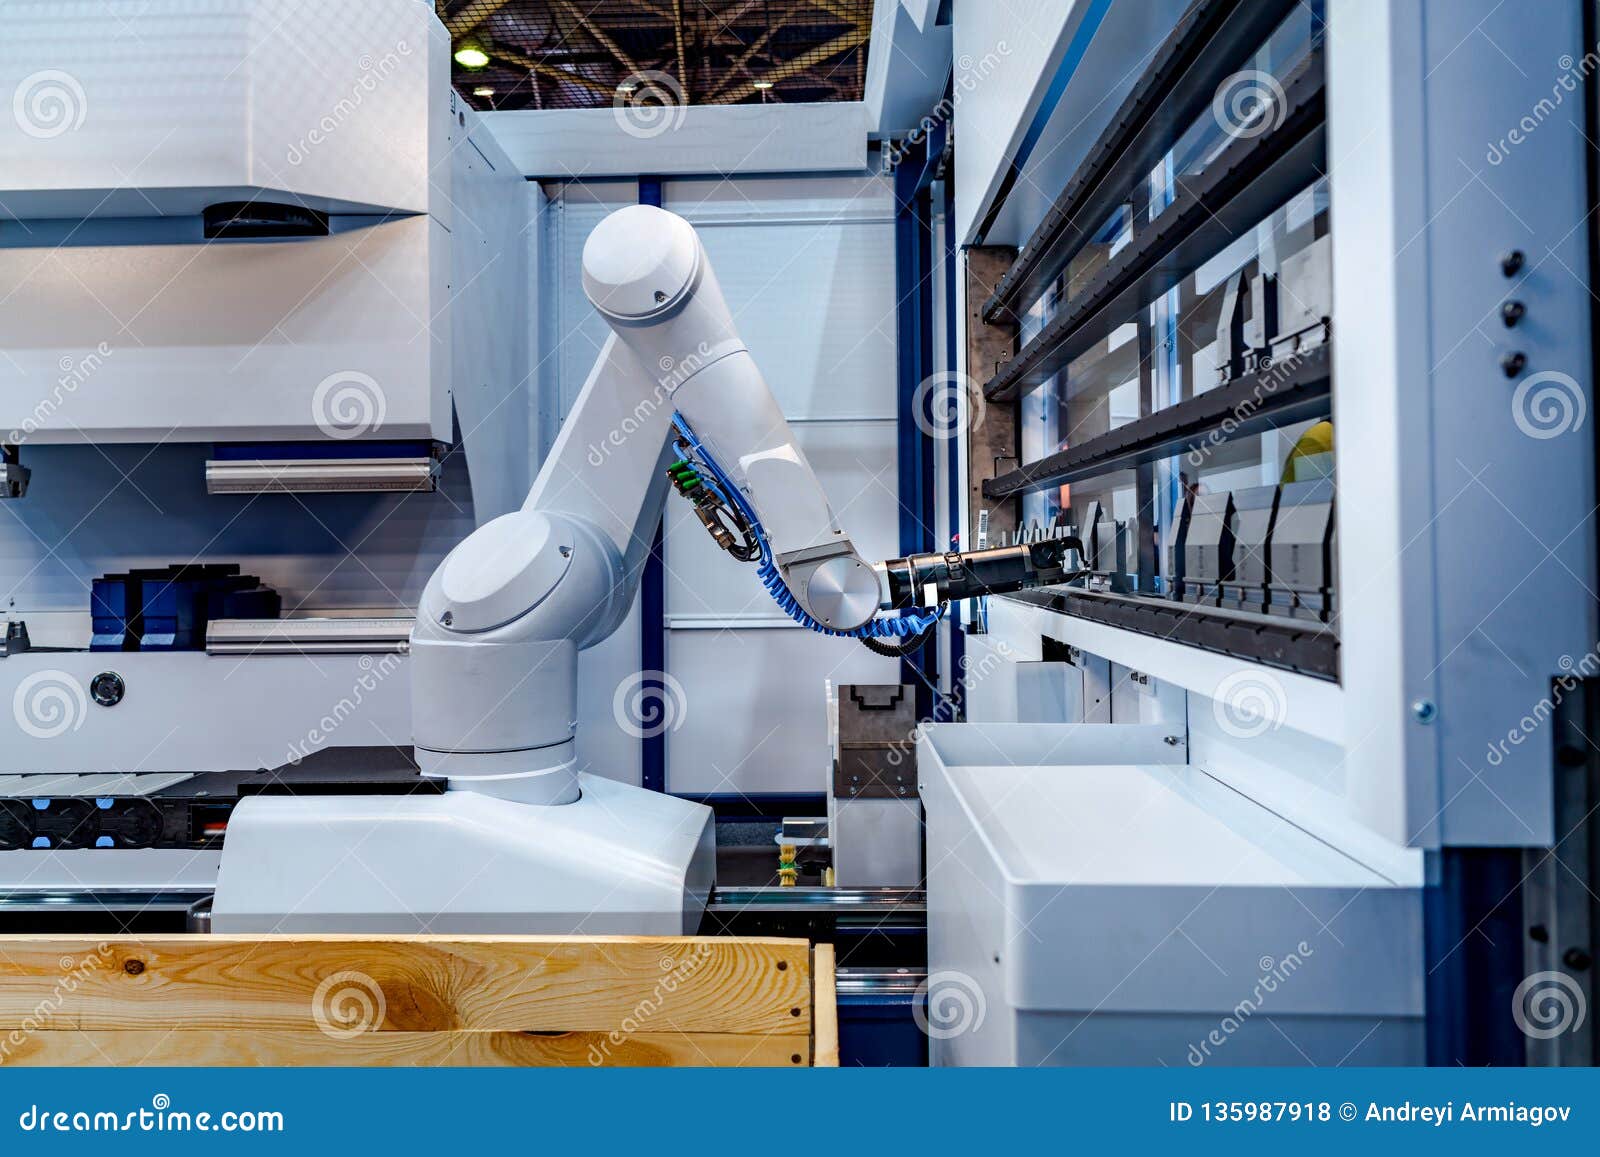 robotic arm modern industrial technology. automated production cell